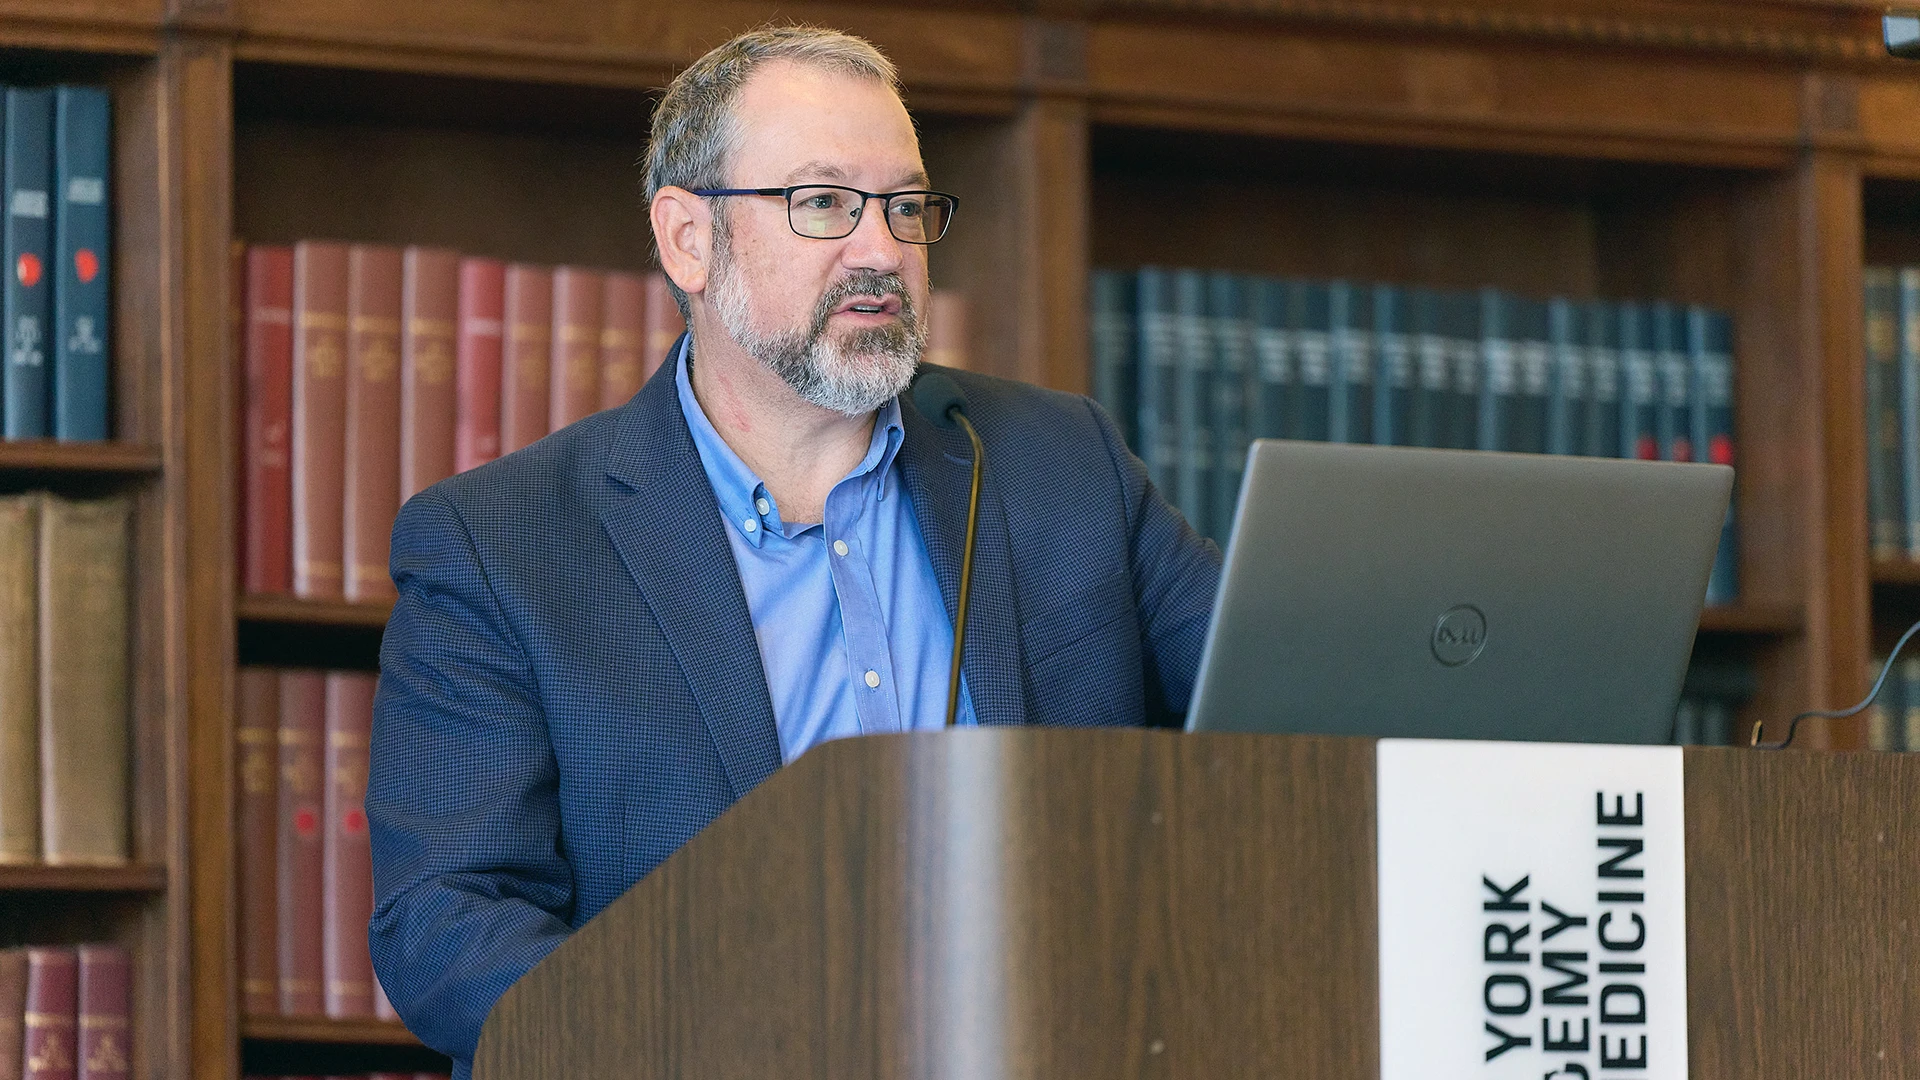 Joshua Gordon, MD, PhD, Director of the National Institute of Mental Health (NIMH), gave welcoming remarks at the meeting. This study, spanning thousands of participants, is a significant commitment by NIMH to move the needle in understanding and treating schizophrenia.